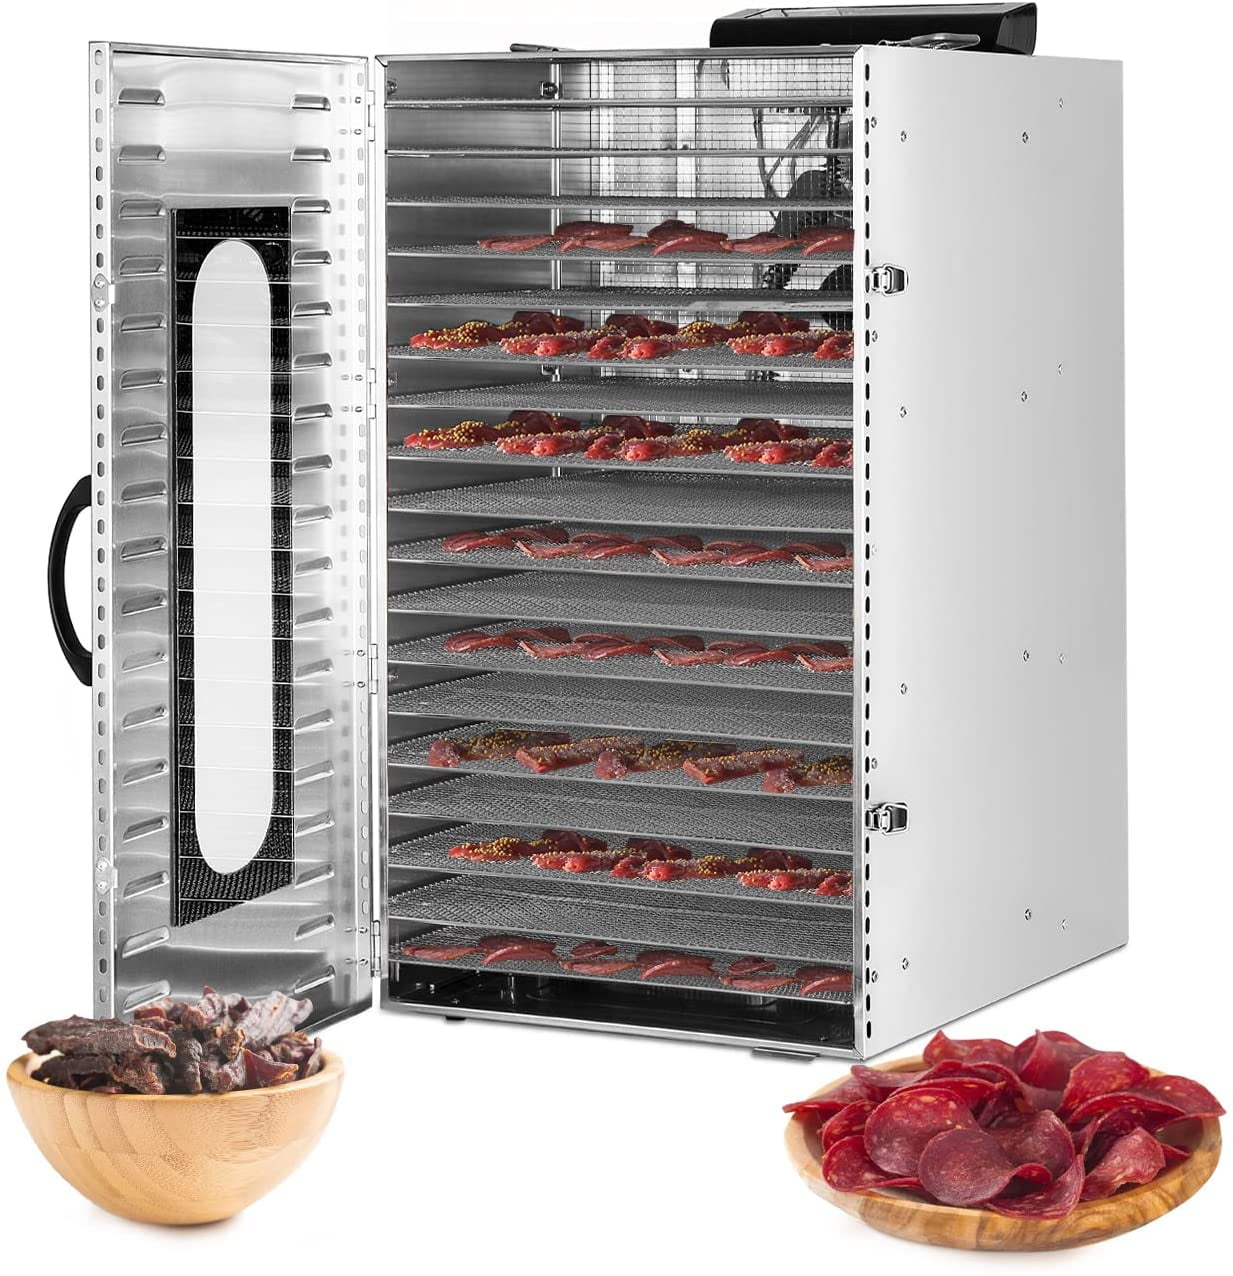 Commercial Stainless Steel Food Dehydrator for food and Jerky 1500W 20 Layers Food Dryer with Digital Adjustable Timer 0-2 - Walmart.com